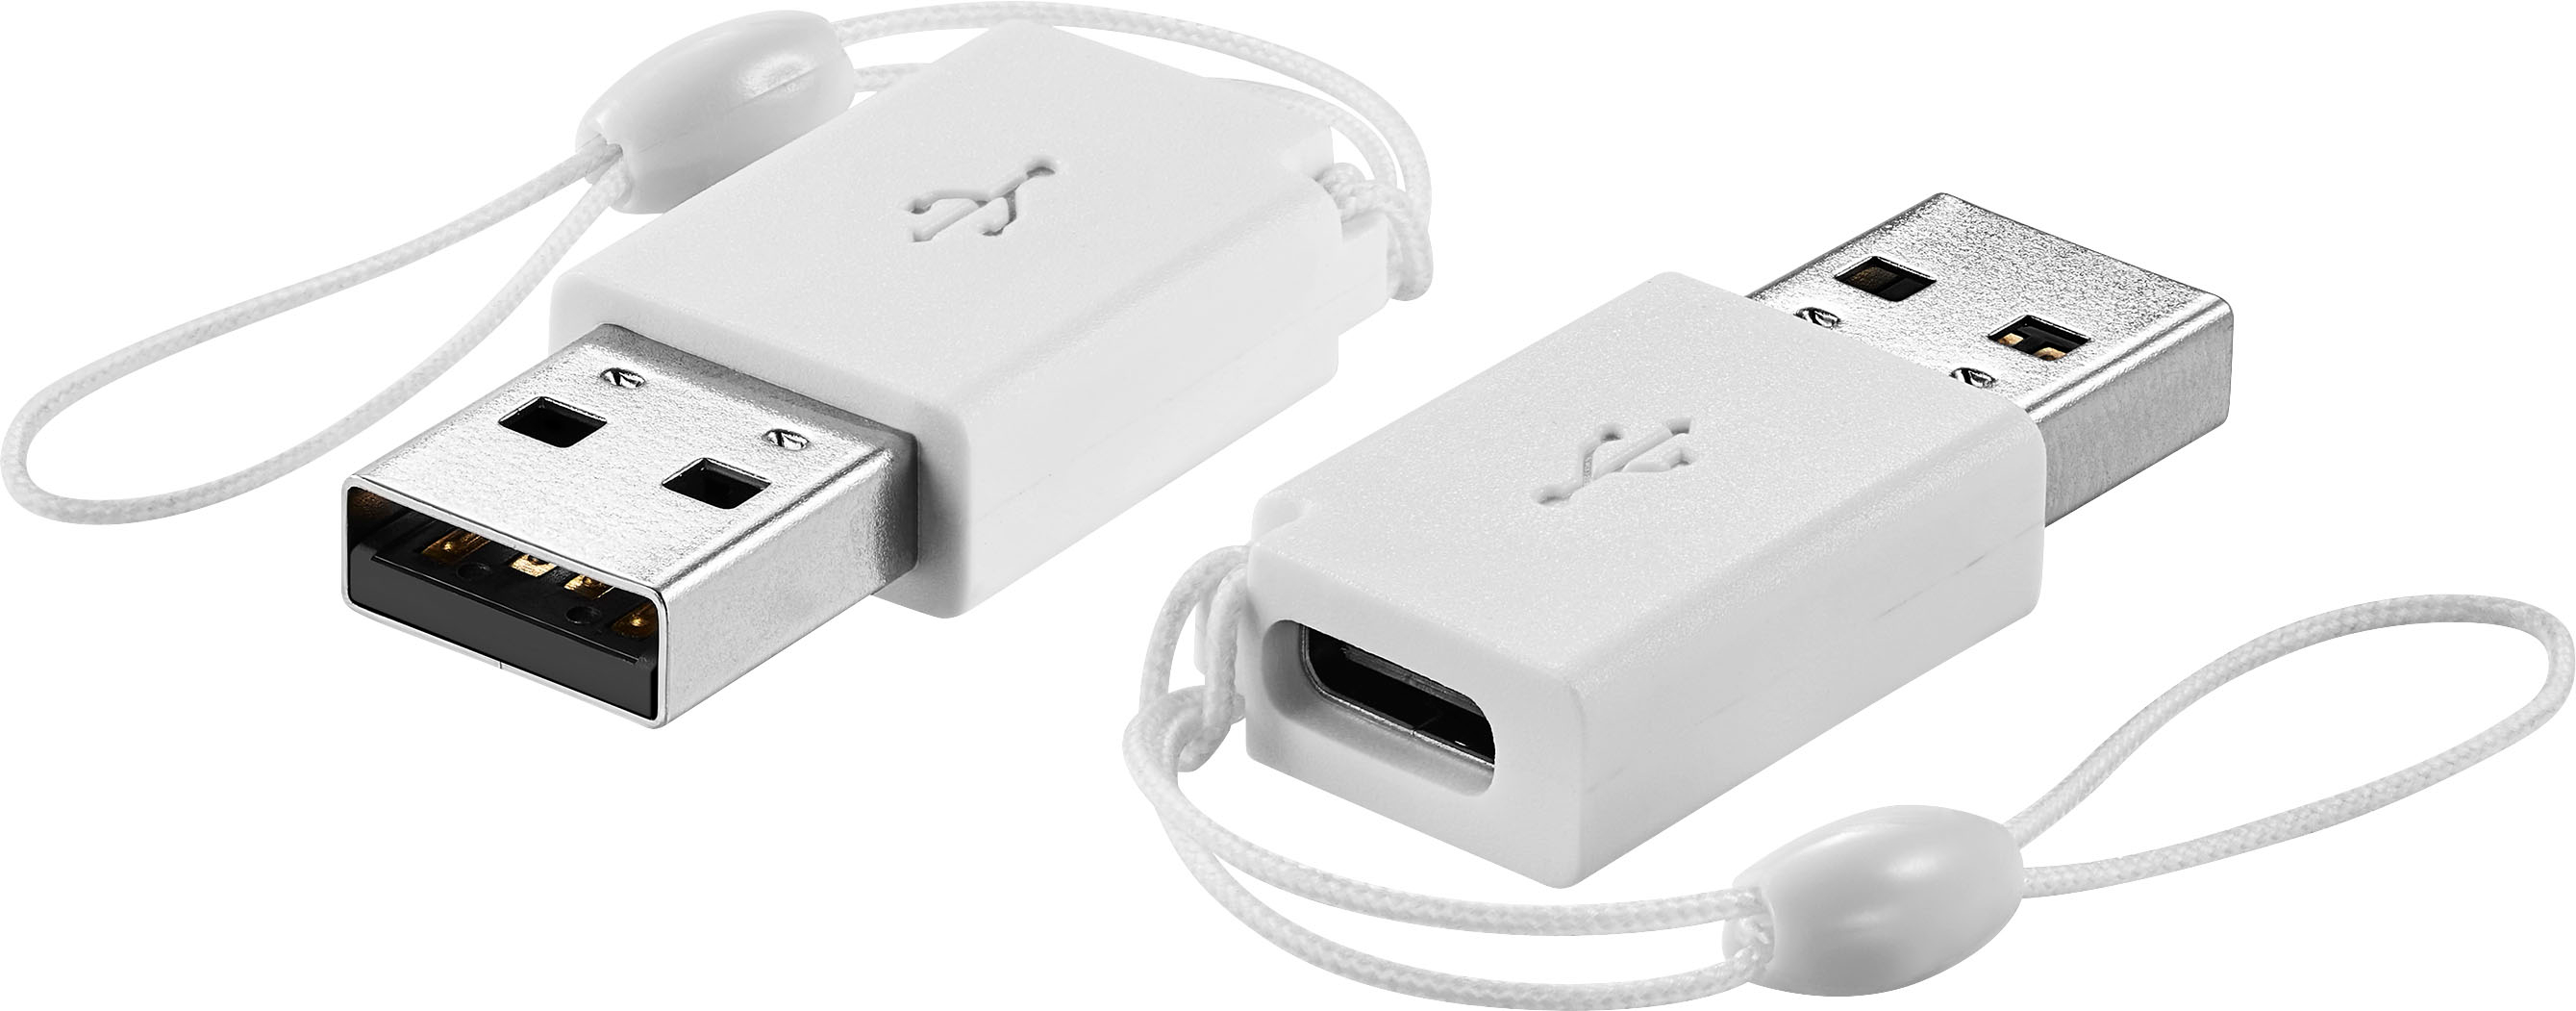 Buy essentials™ Female USB-C to Male USB Adapter (2-Pack) White BE-MAUSBC2AW23 - Best Buy